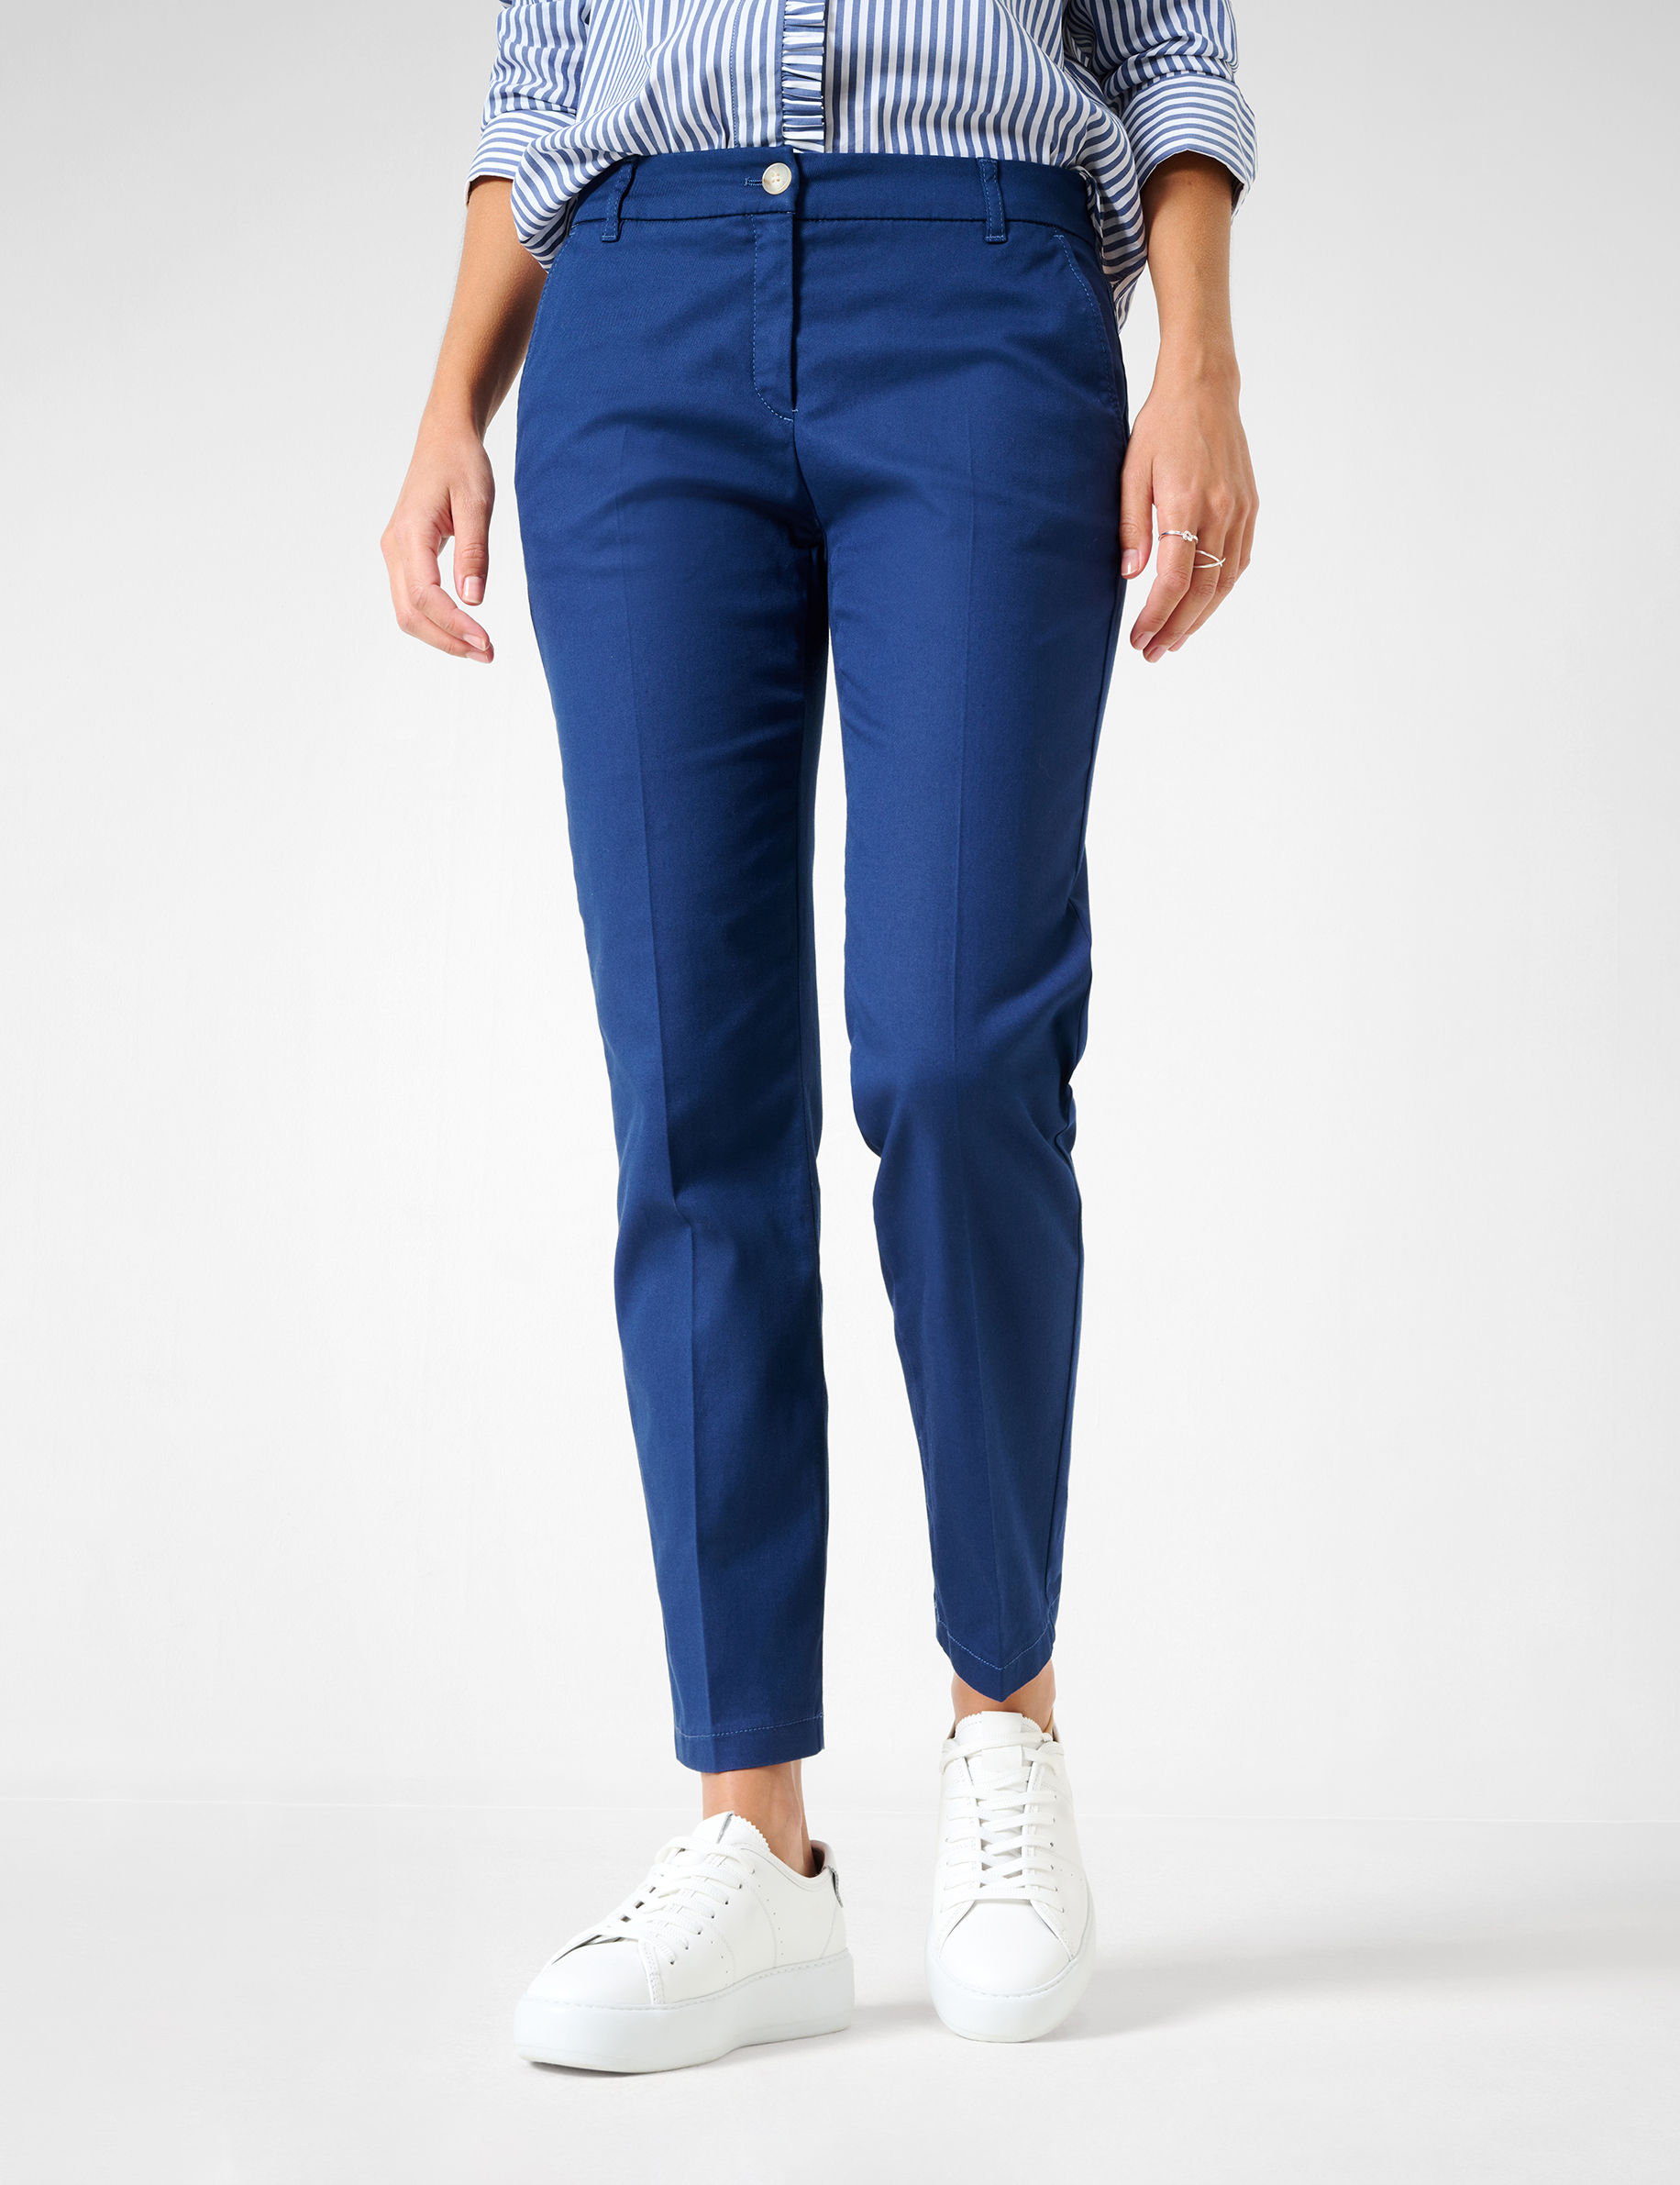 Shades of Blue, Women, REGULAR BOOTCUT, Style MARON S, MODEL_FRONT_ISHOP